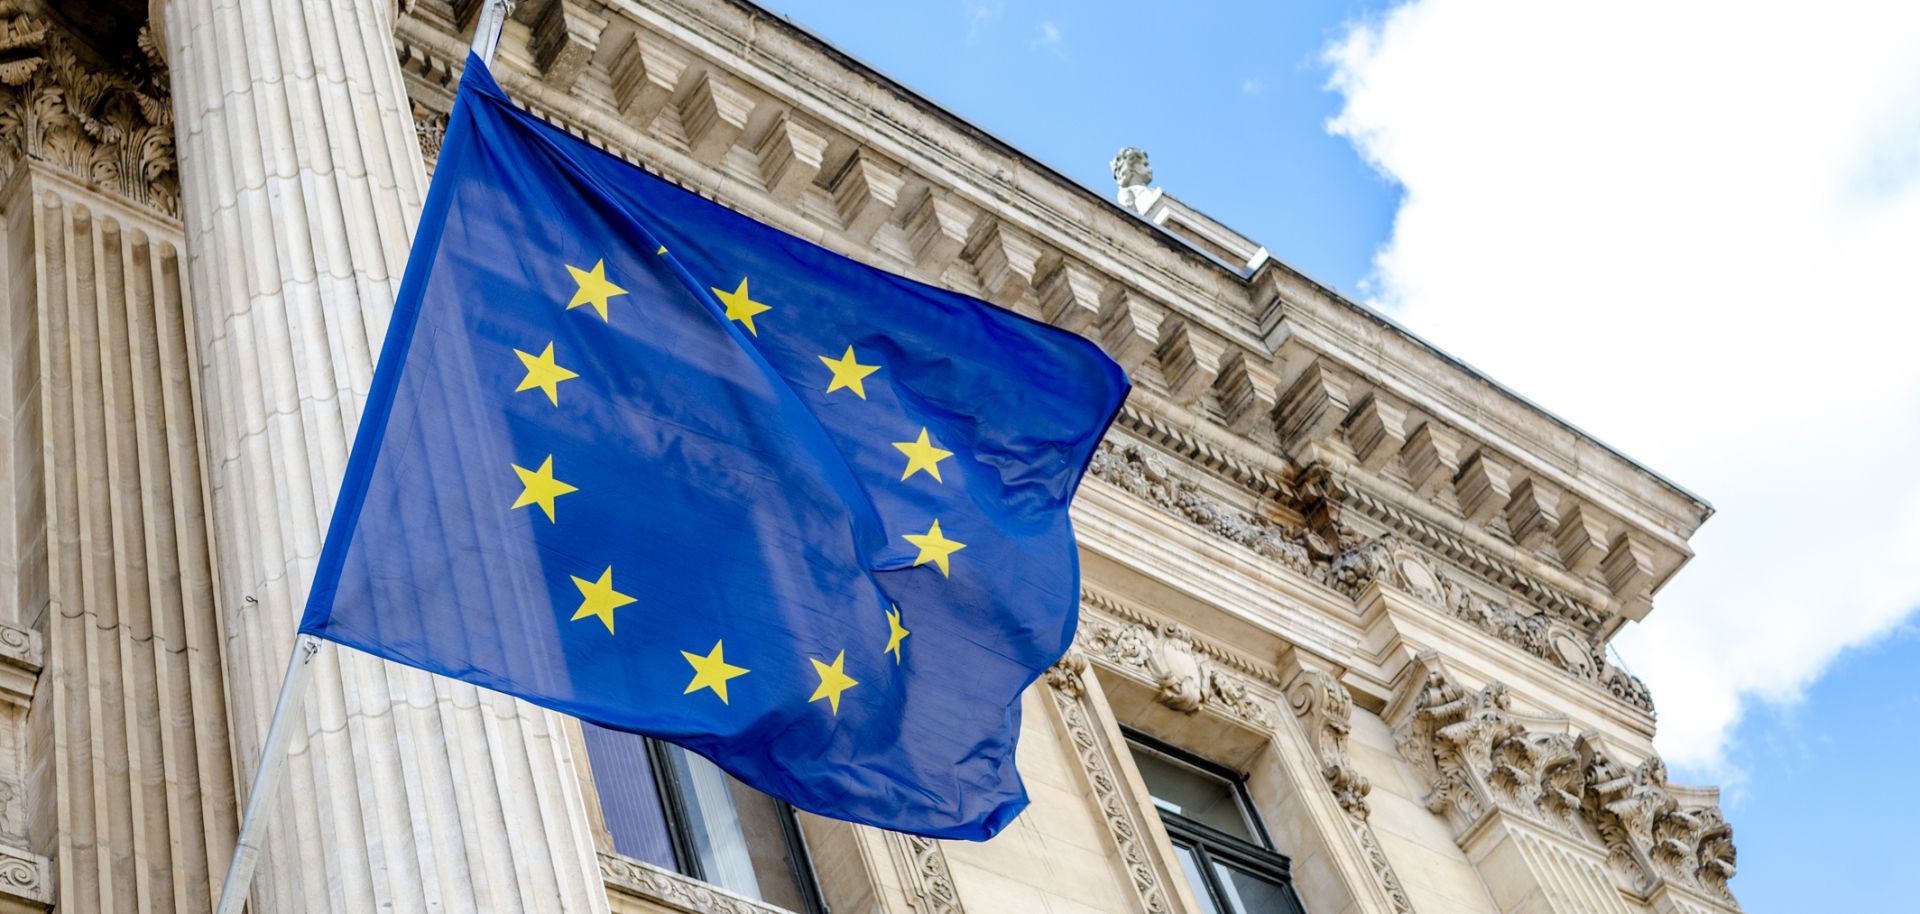 The EU flag flies over the stock exchange building in Brussels.